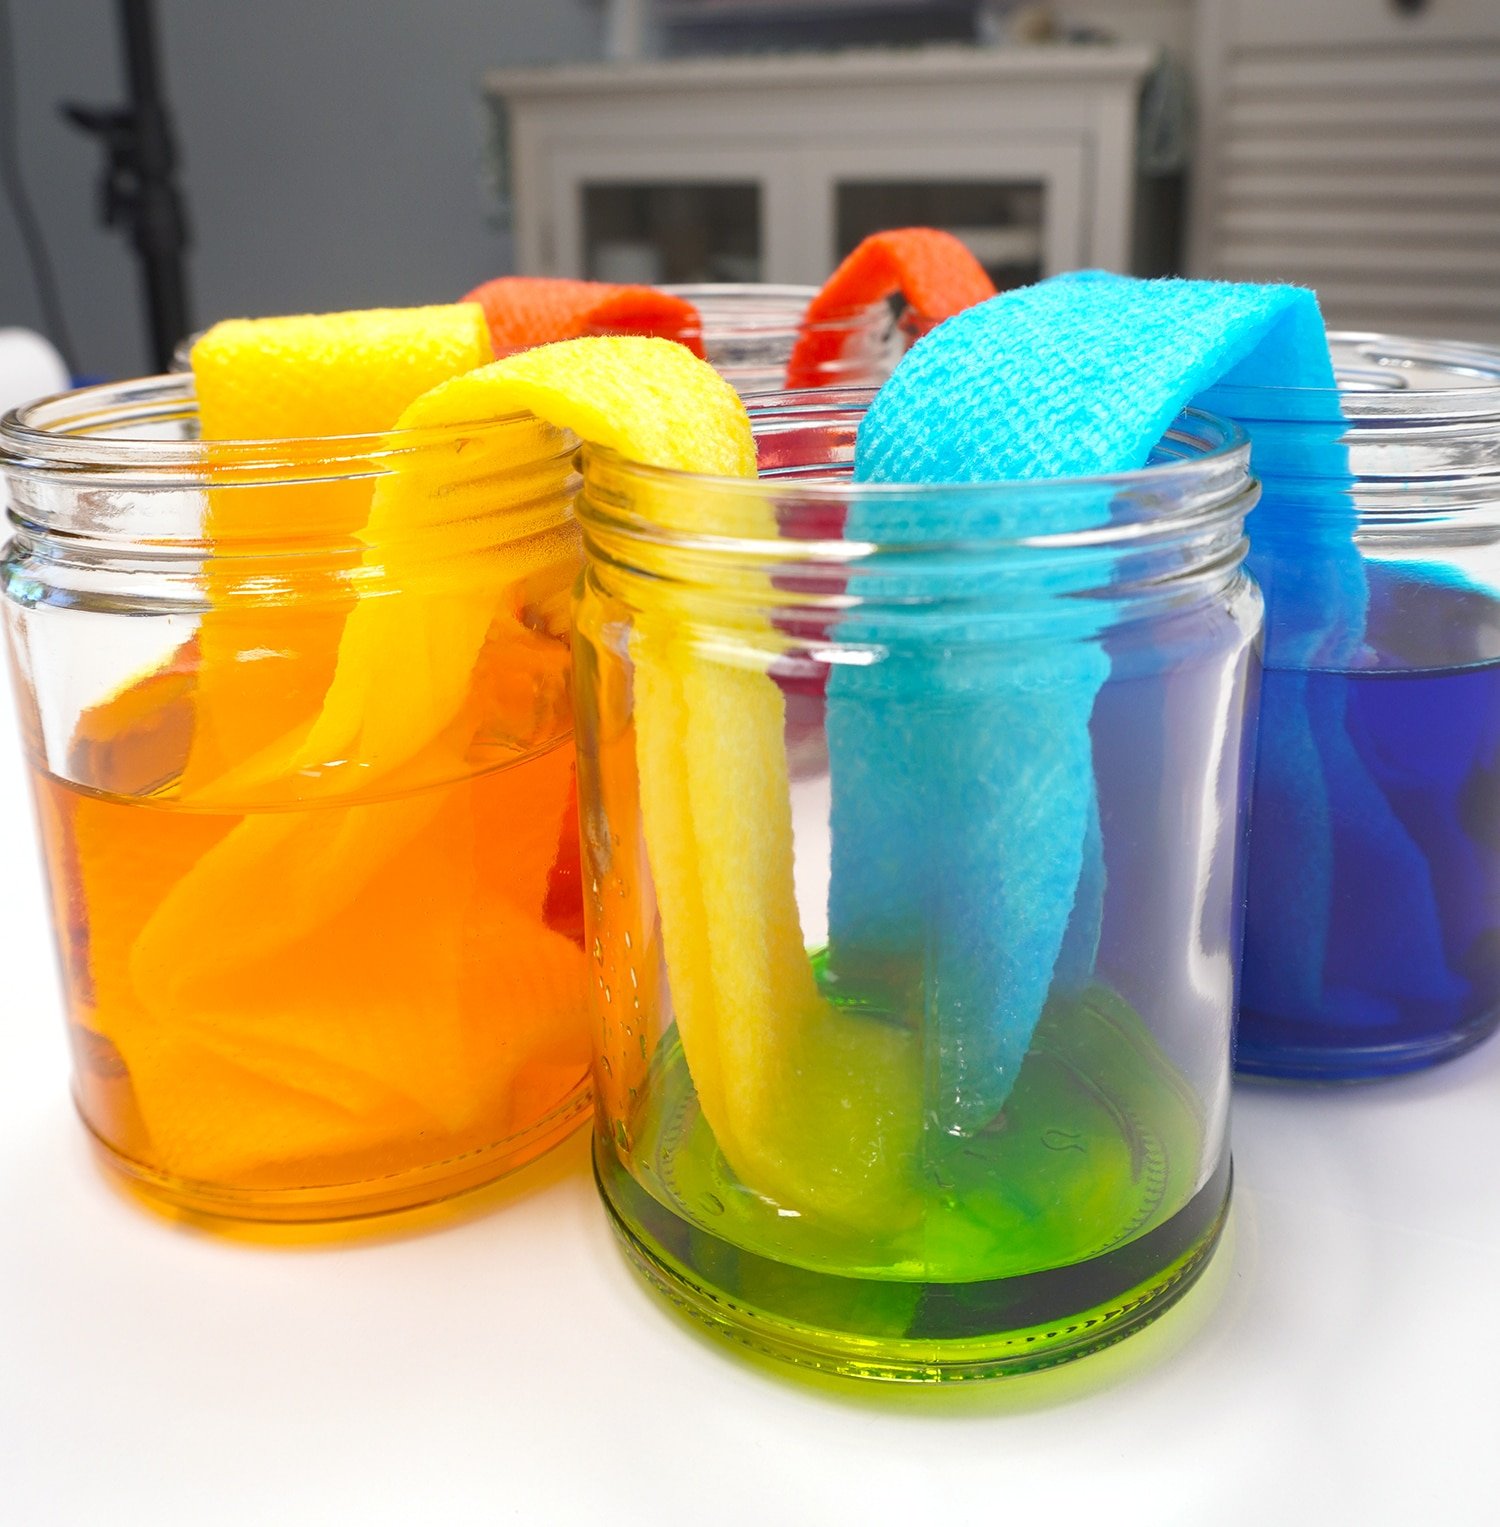 empty jars now filling with the secondary colors from submerged paper strips in primary color jars